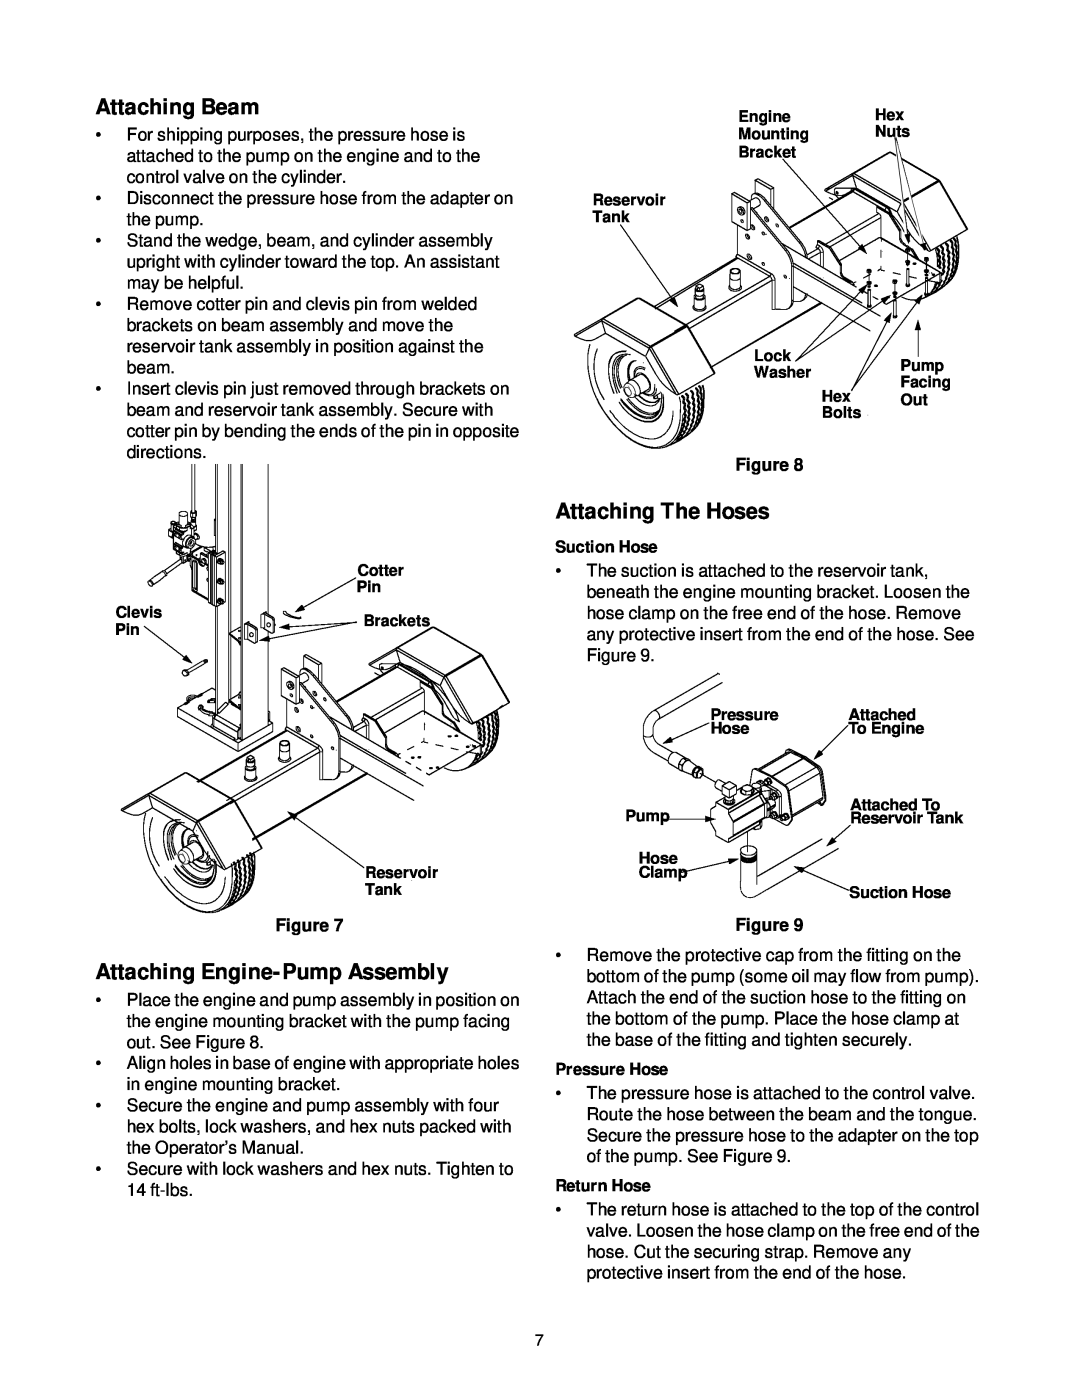 Troy-Bilt LS338 manual Attaching Beam, Attaching The Hoses, Attaching Engine-Pump Assembly, Suction Hose, Pressure Hose 